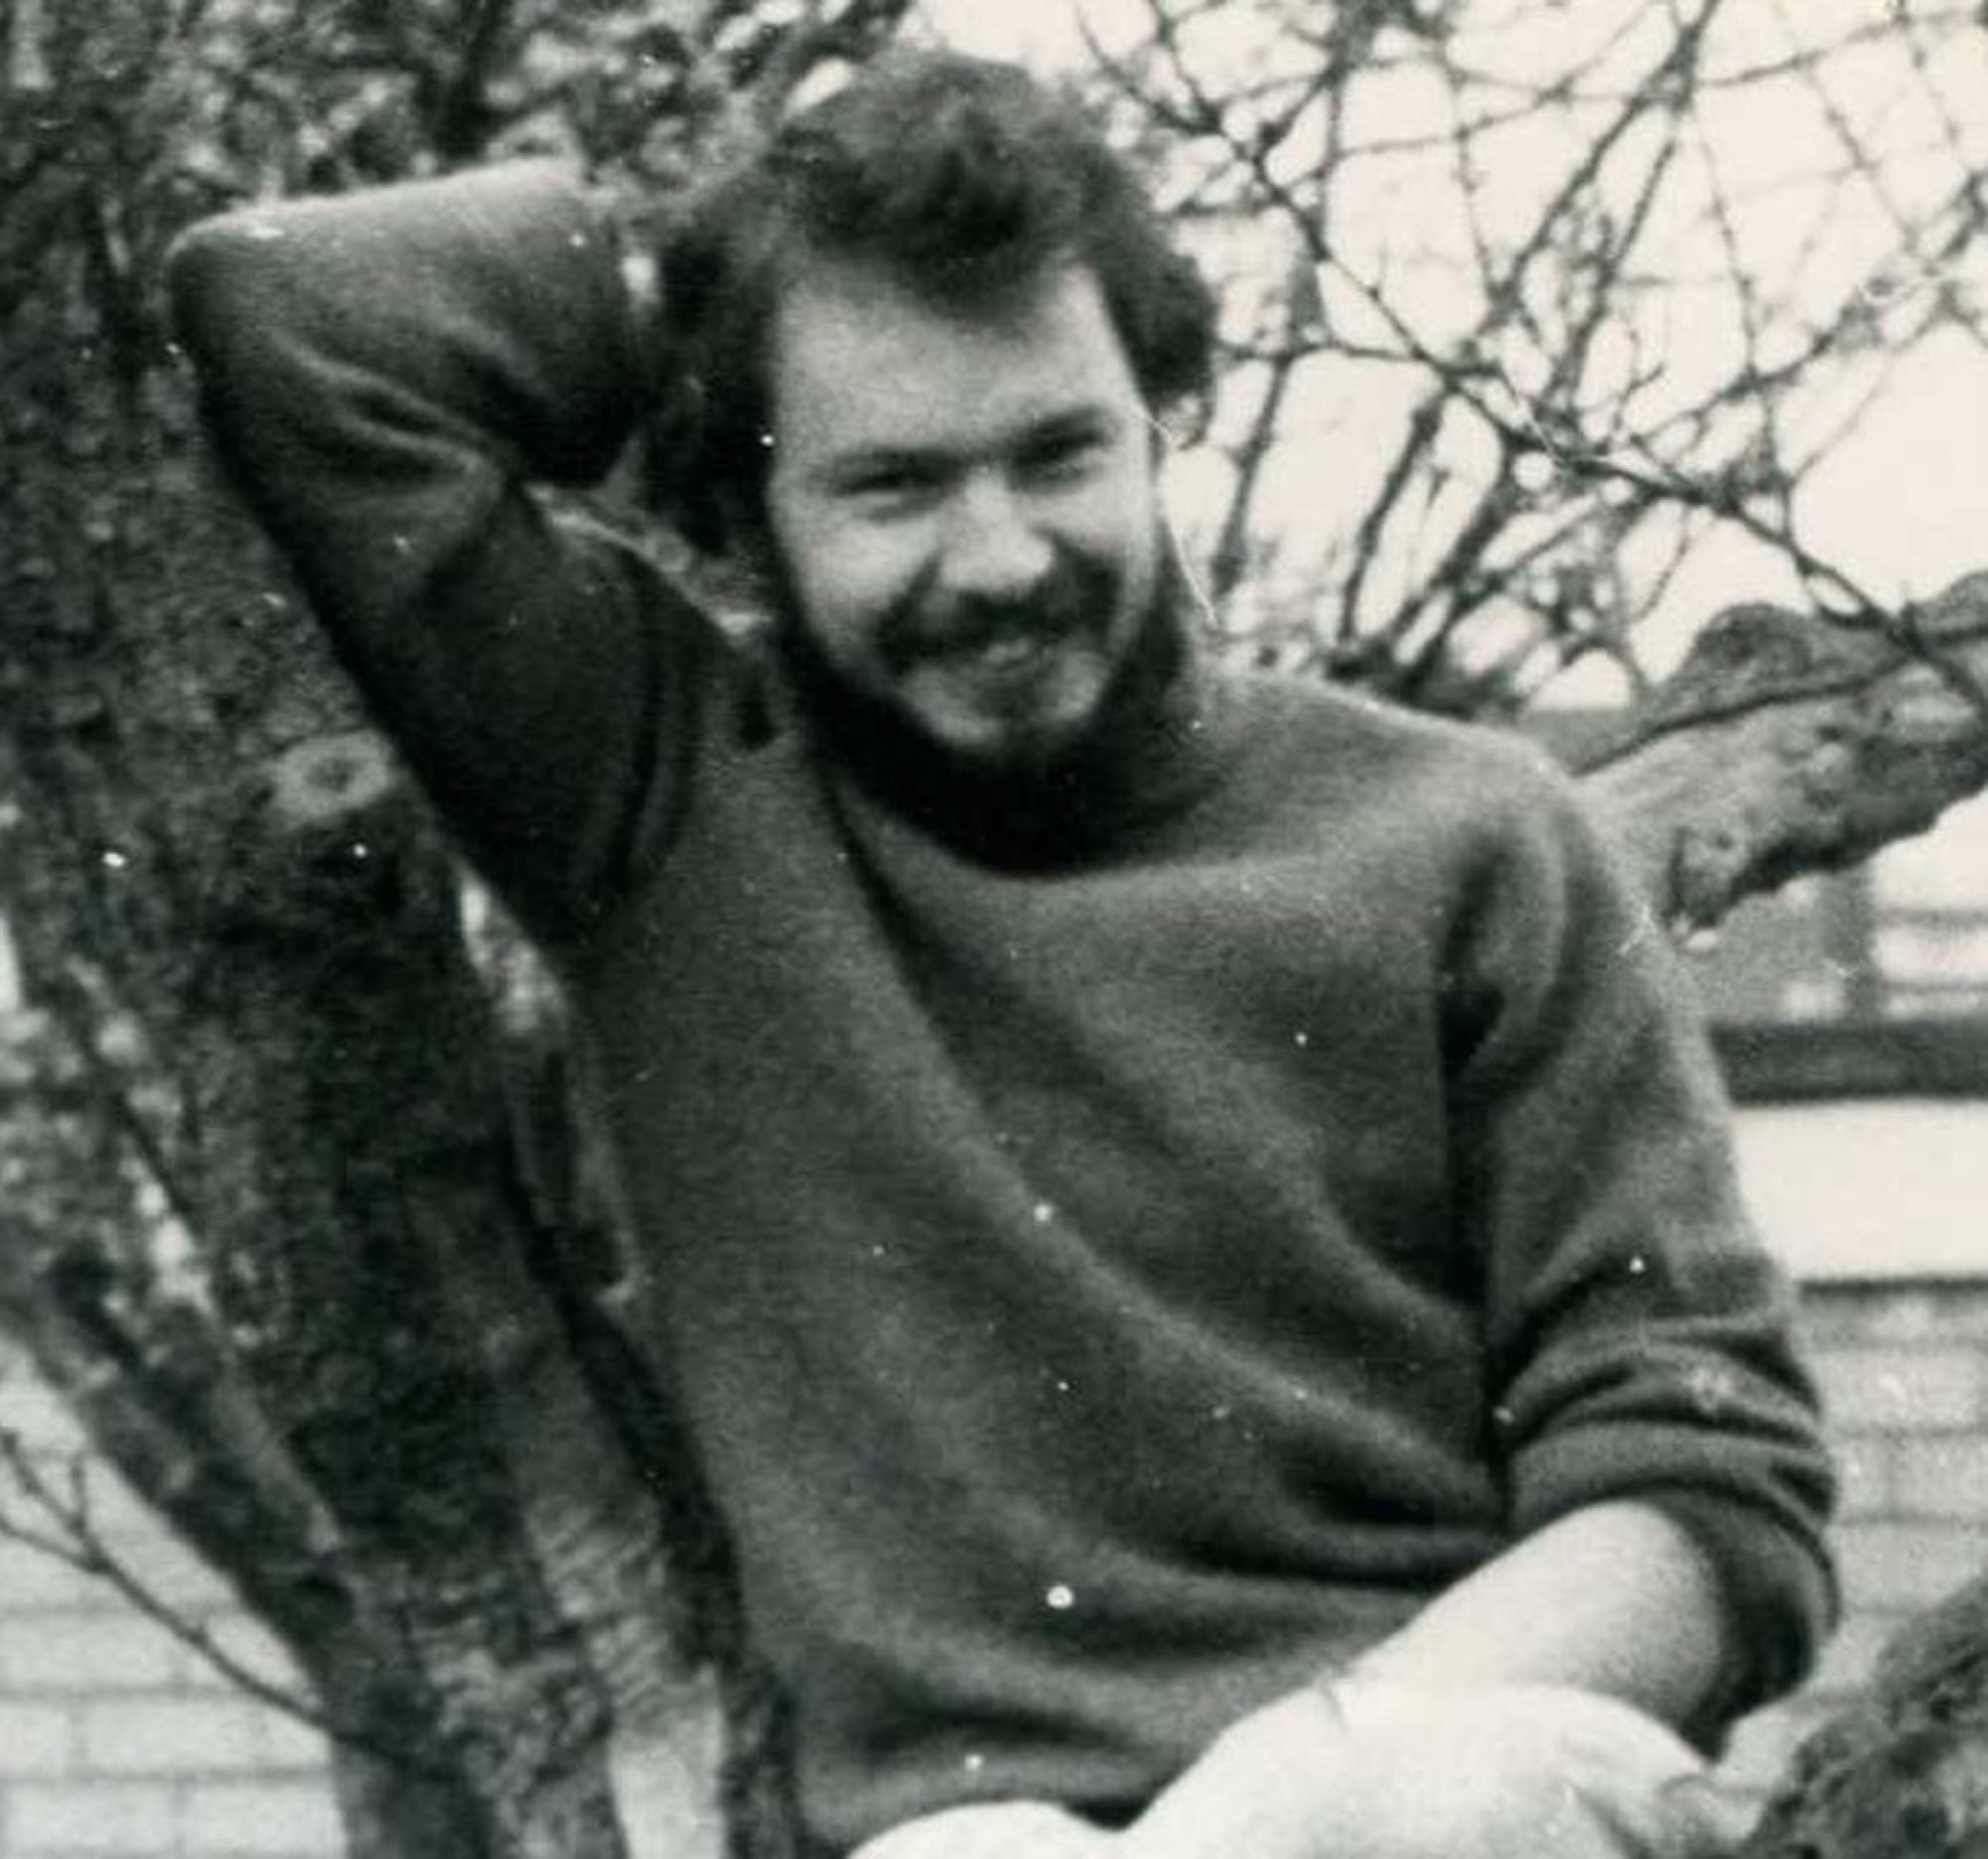 Daniel Morgan, a private investigator who was killed with an axe in the car park of the Golden Lion pub in Sydenham, south-east London, on March 10 1987 (Family handout/PA)